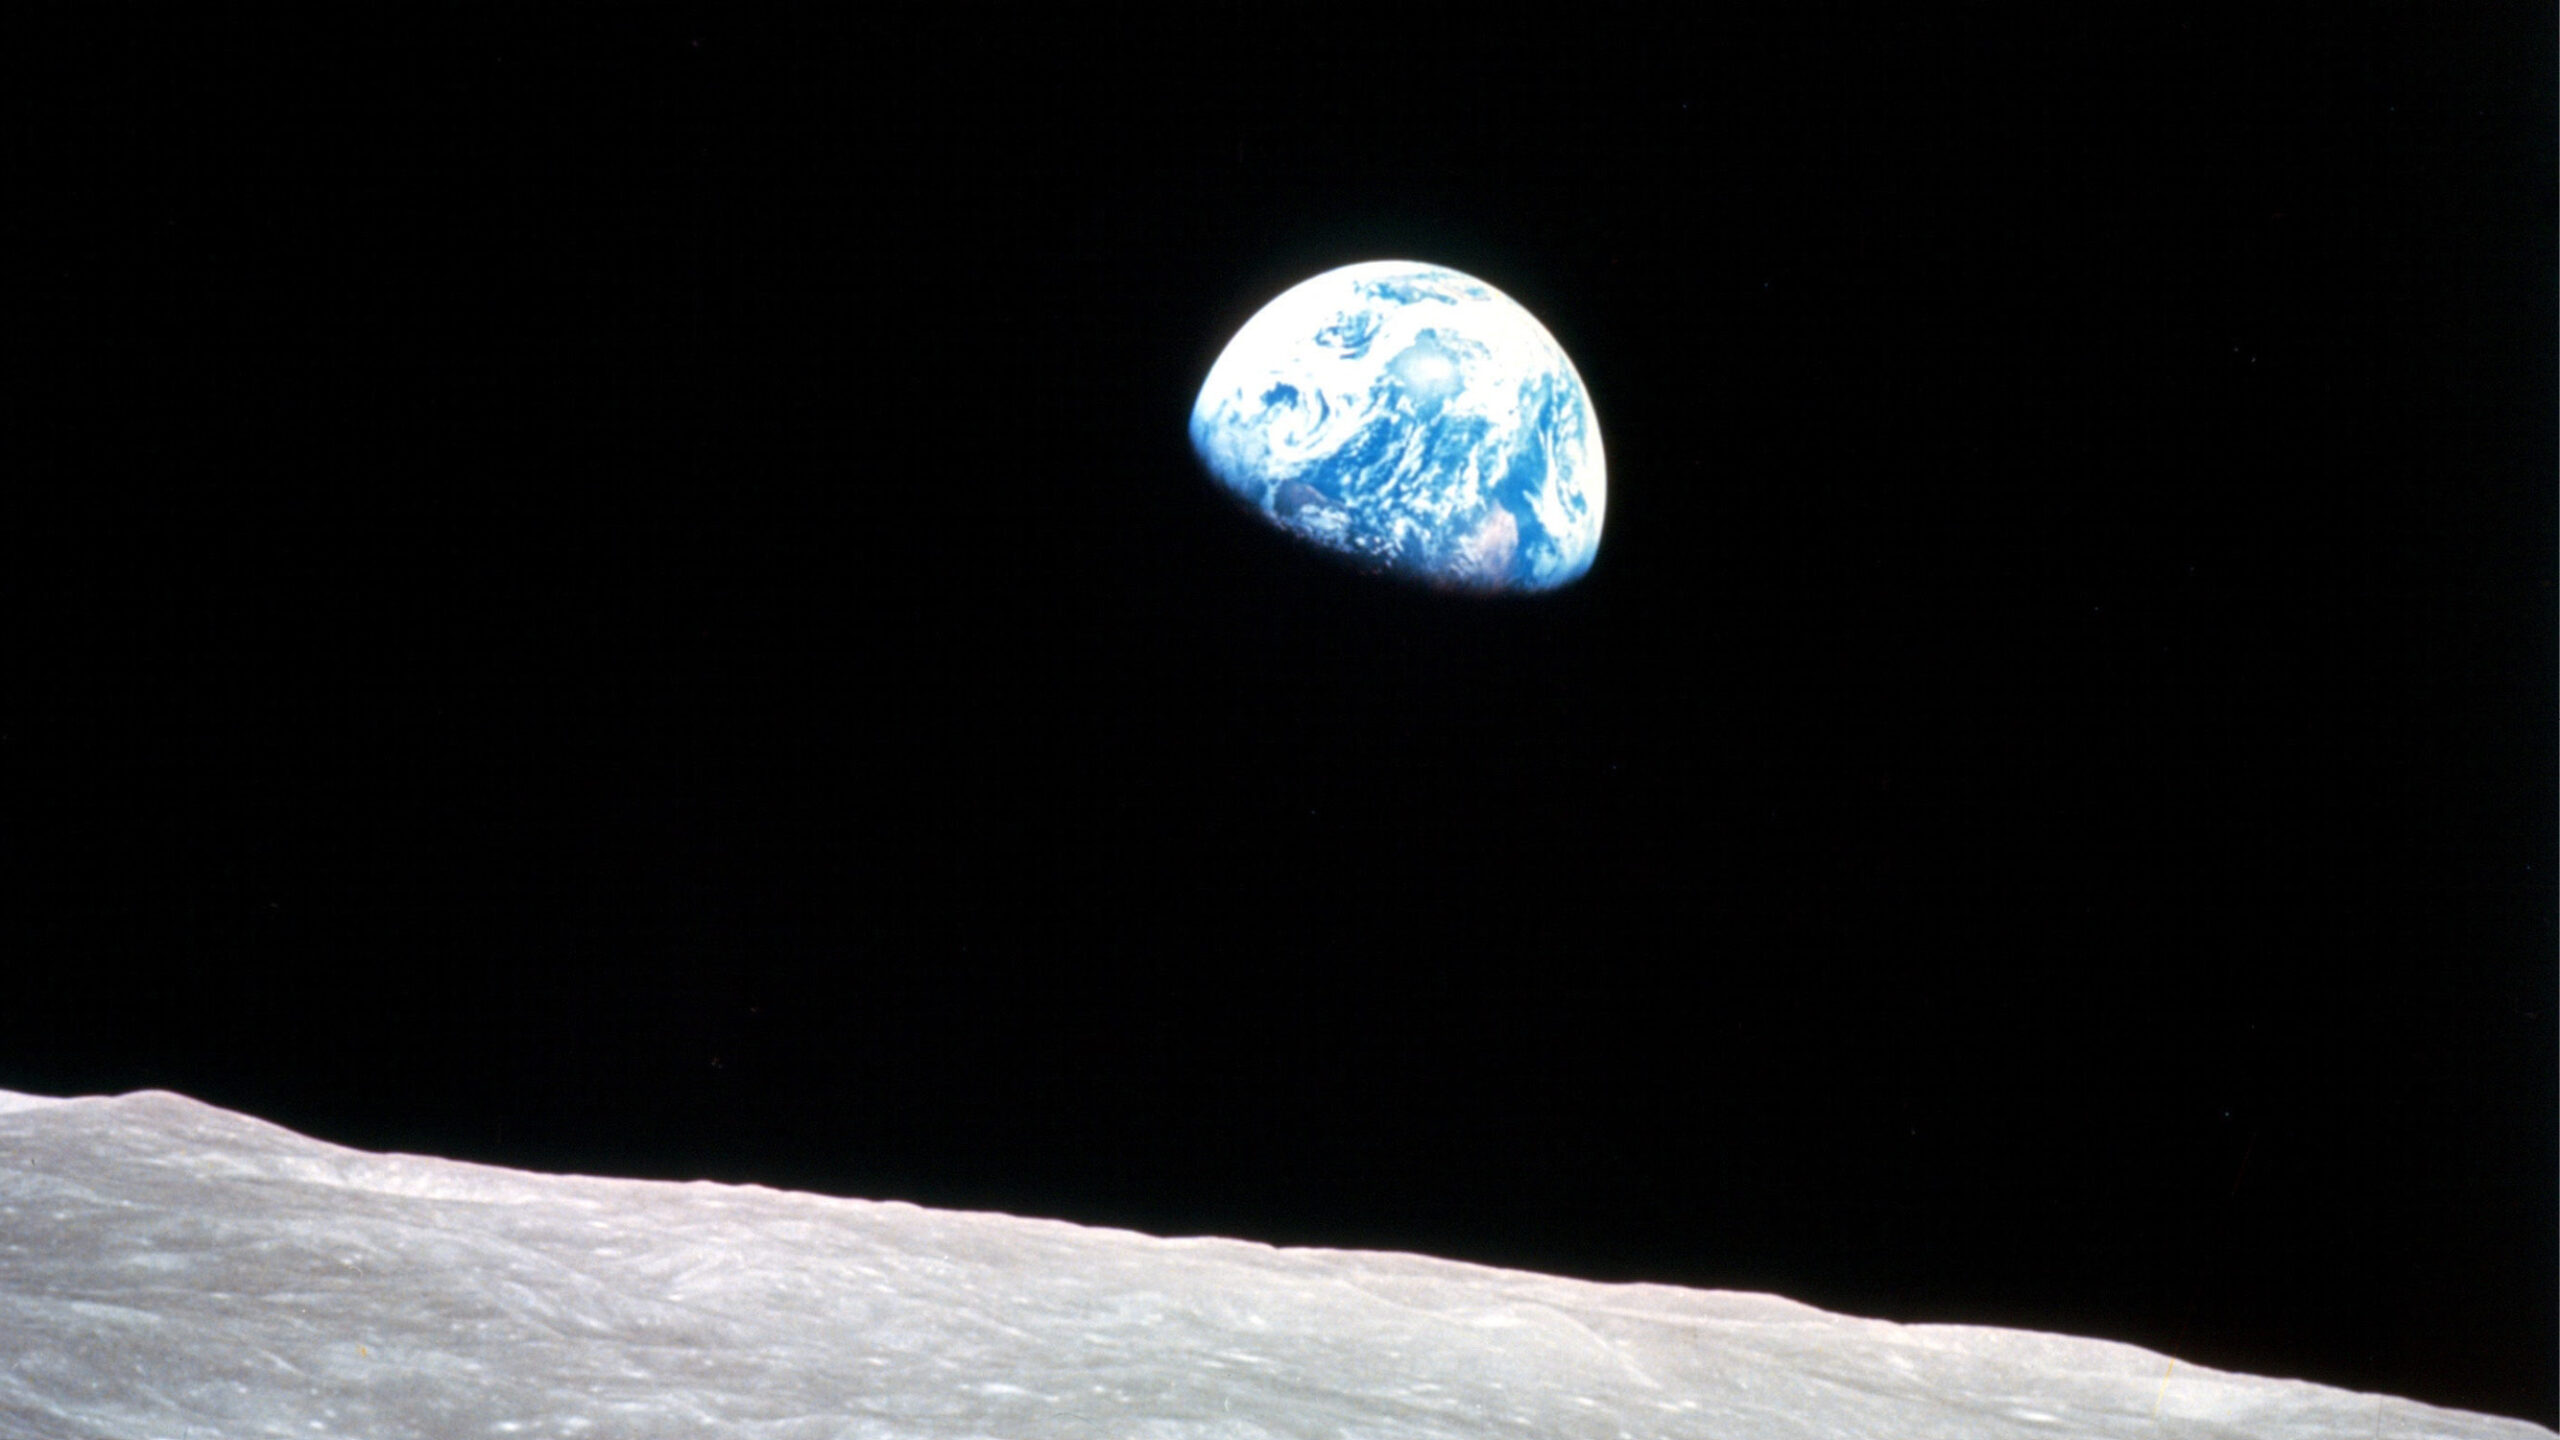 NASA's view of earth from the moon